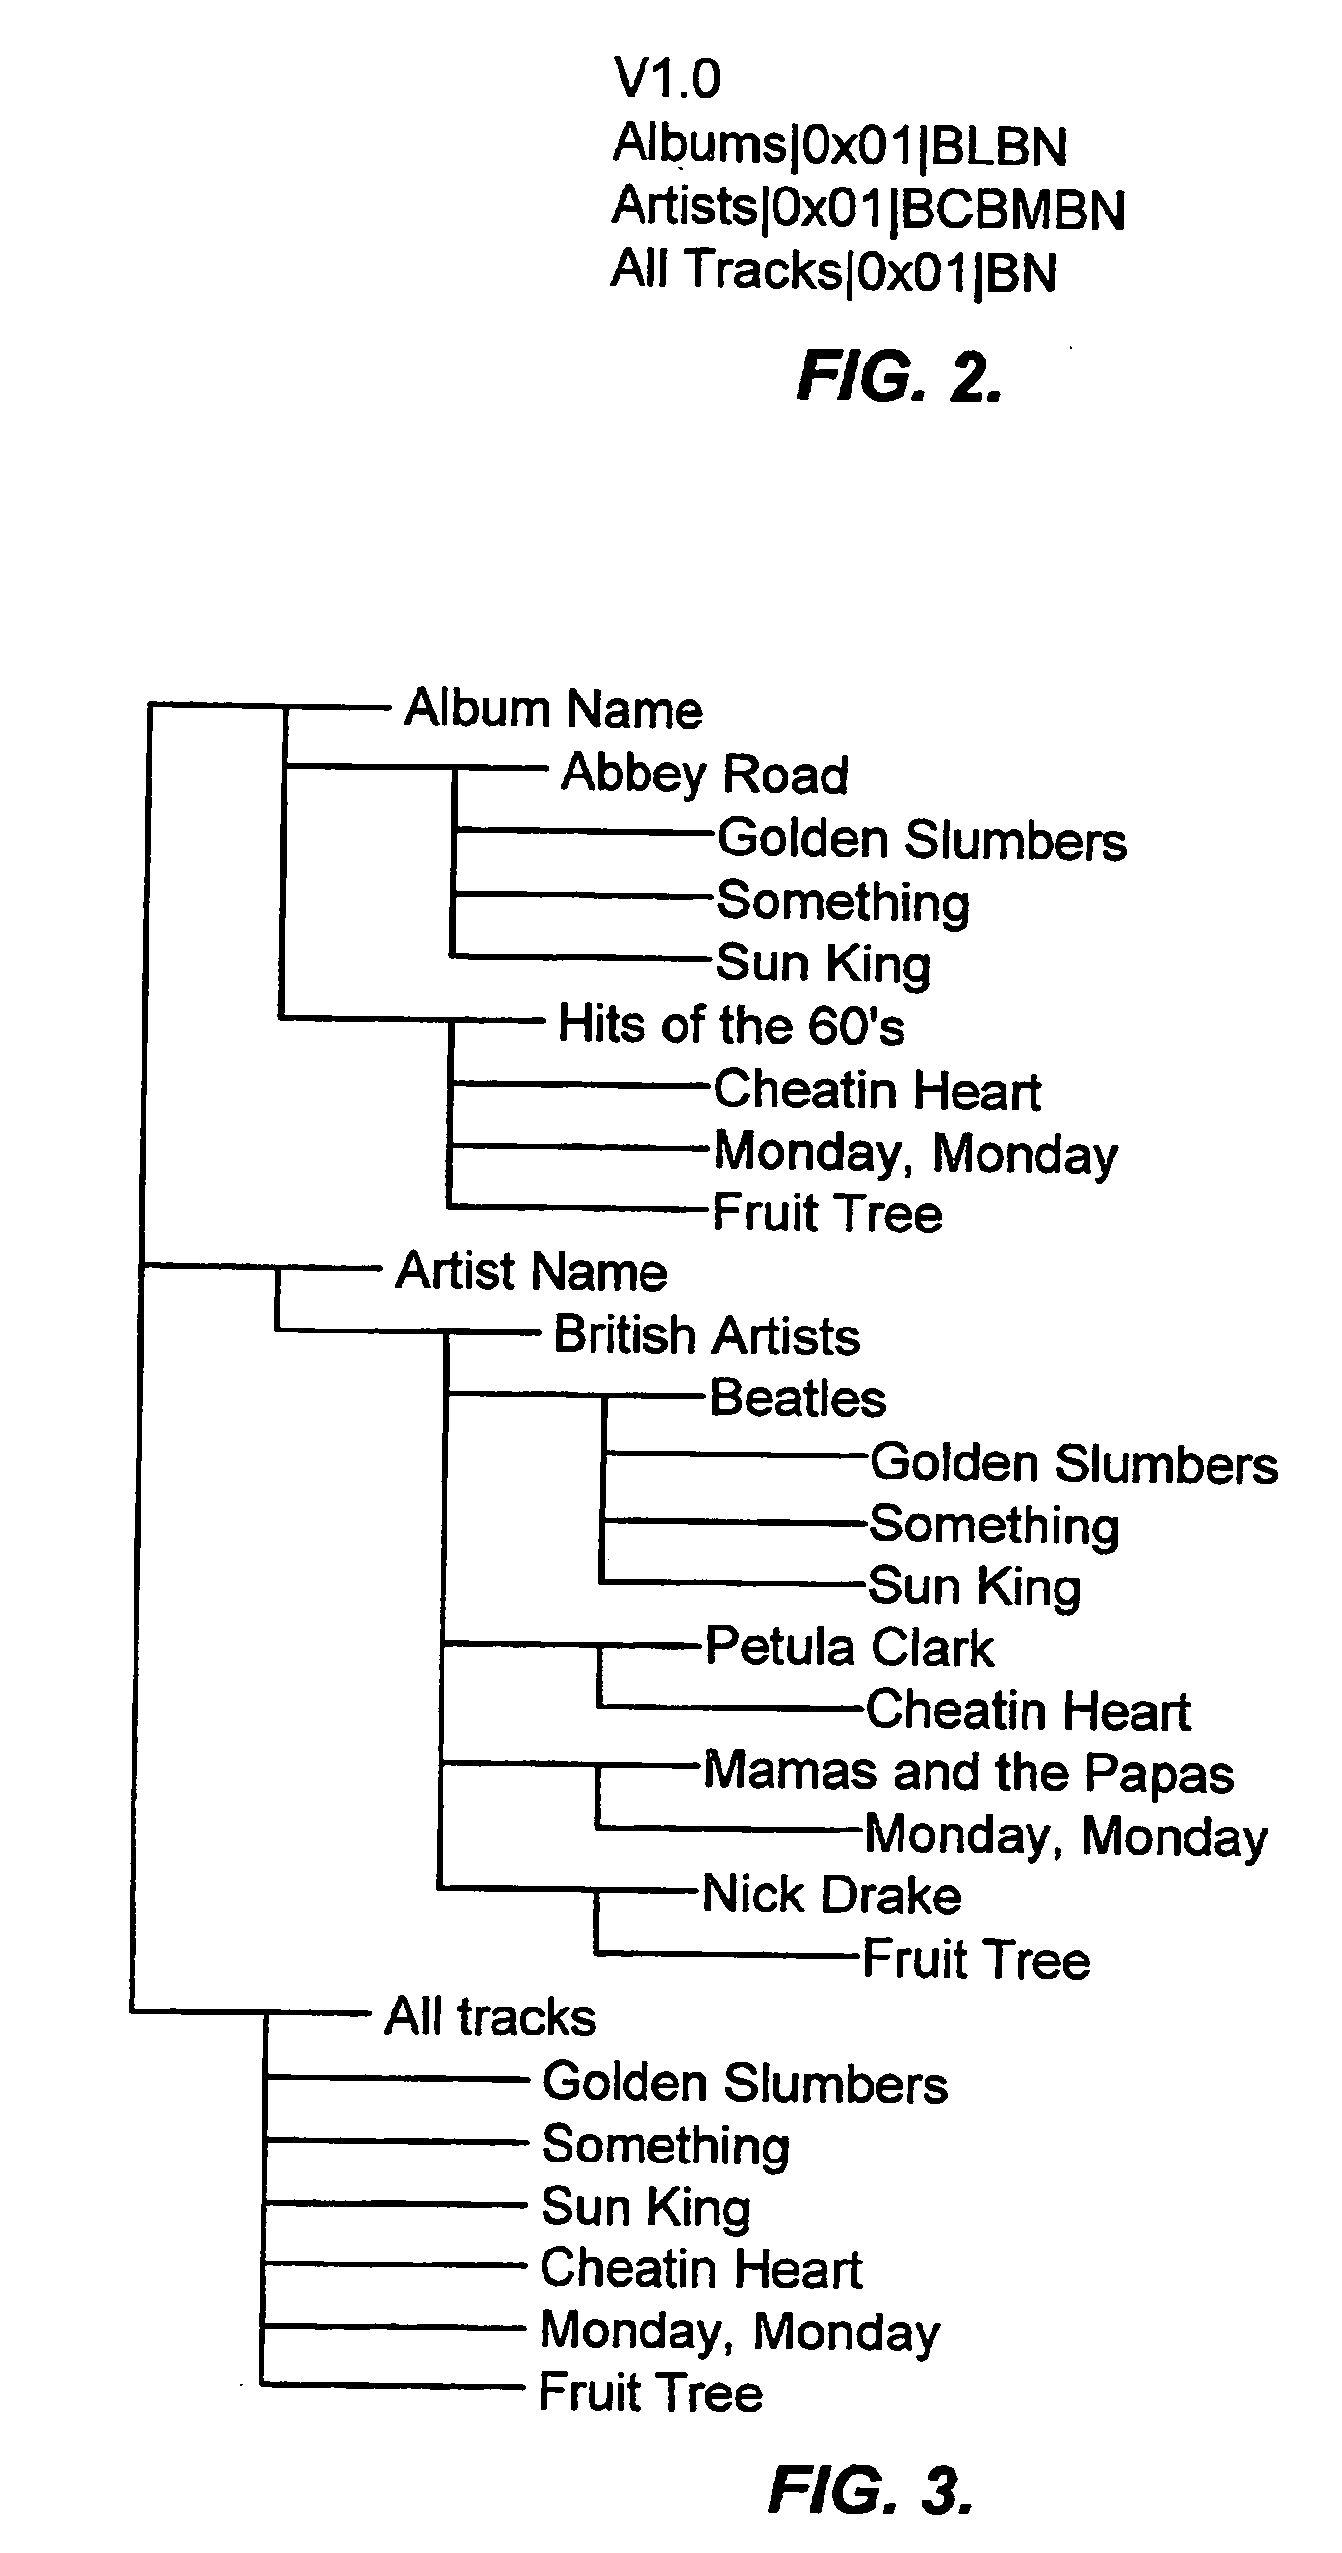 Automatic hierarchical categorization of music by metadata